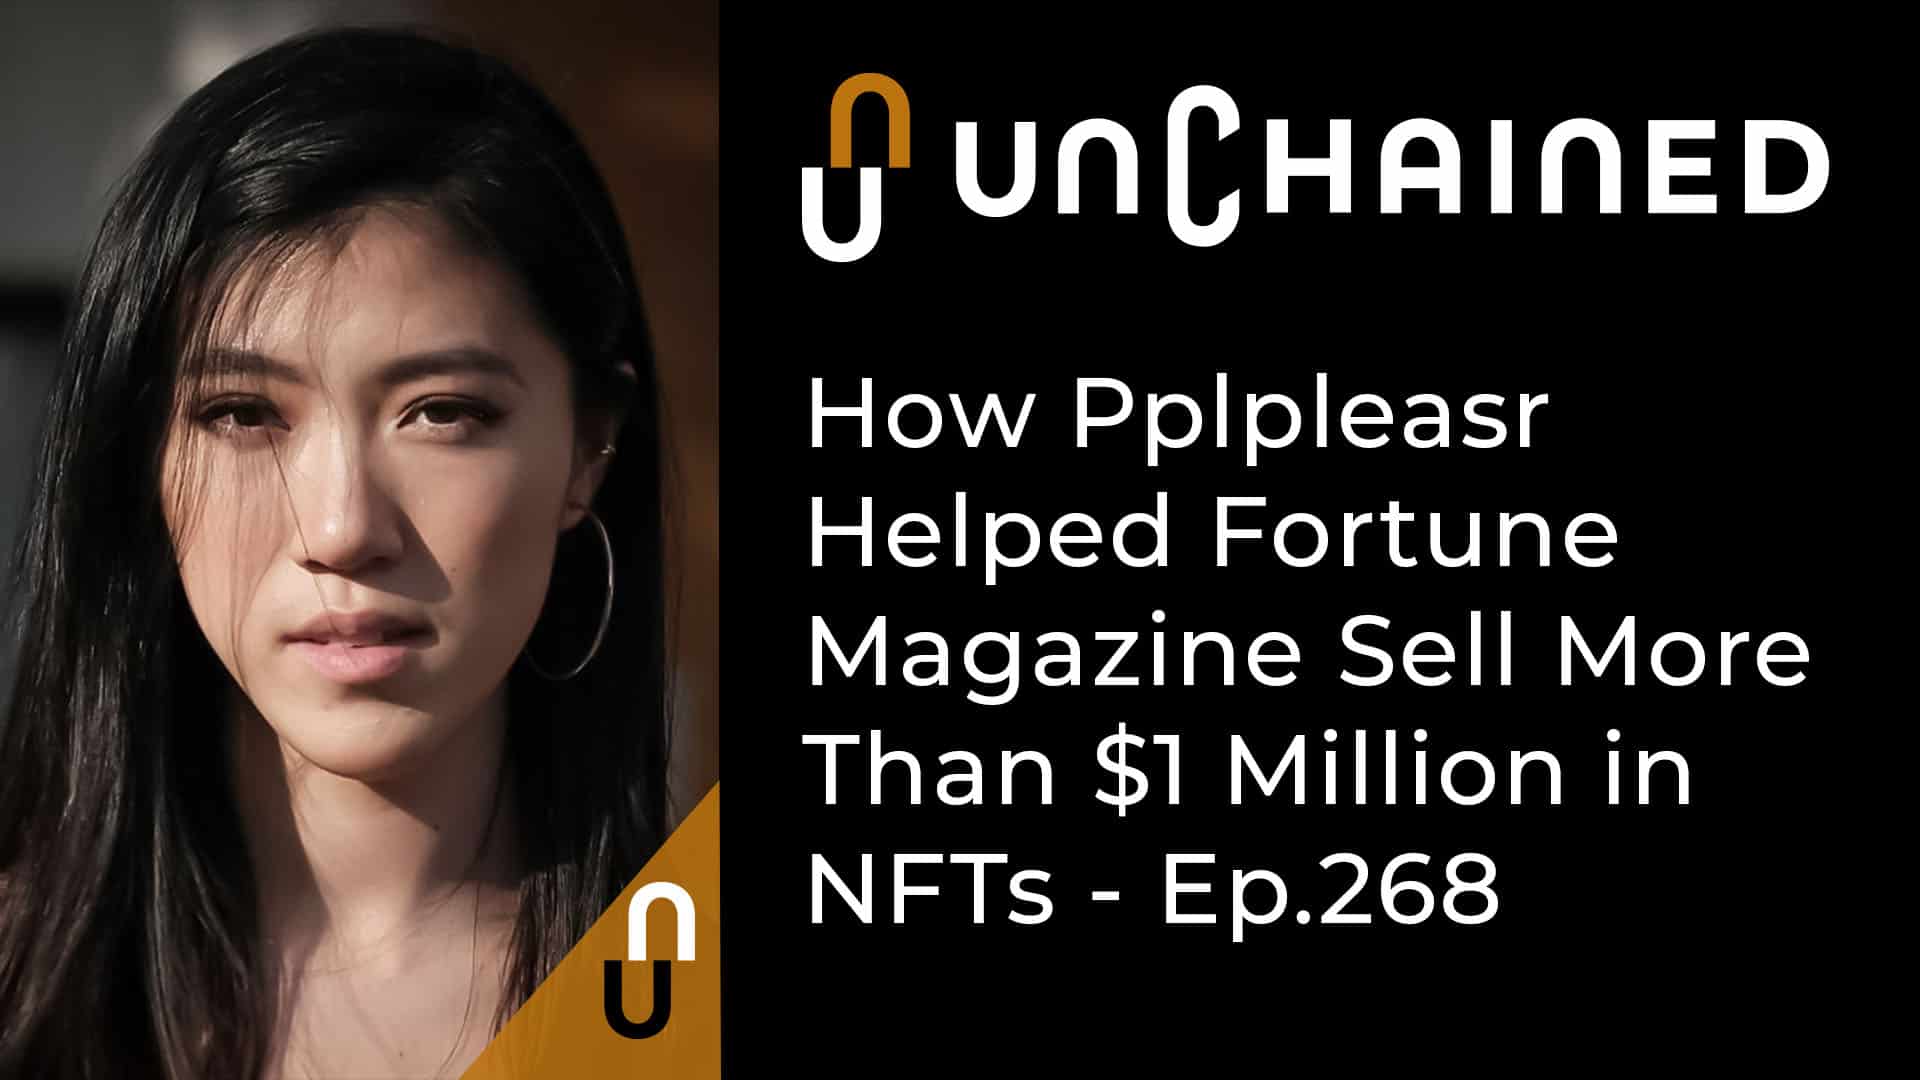 Unchained - Ep.268 - How Pplpleasr Helped Fortune Magazine Sell More Than $1 Million in NFTs